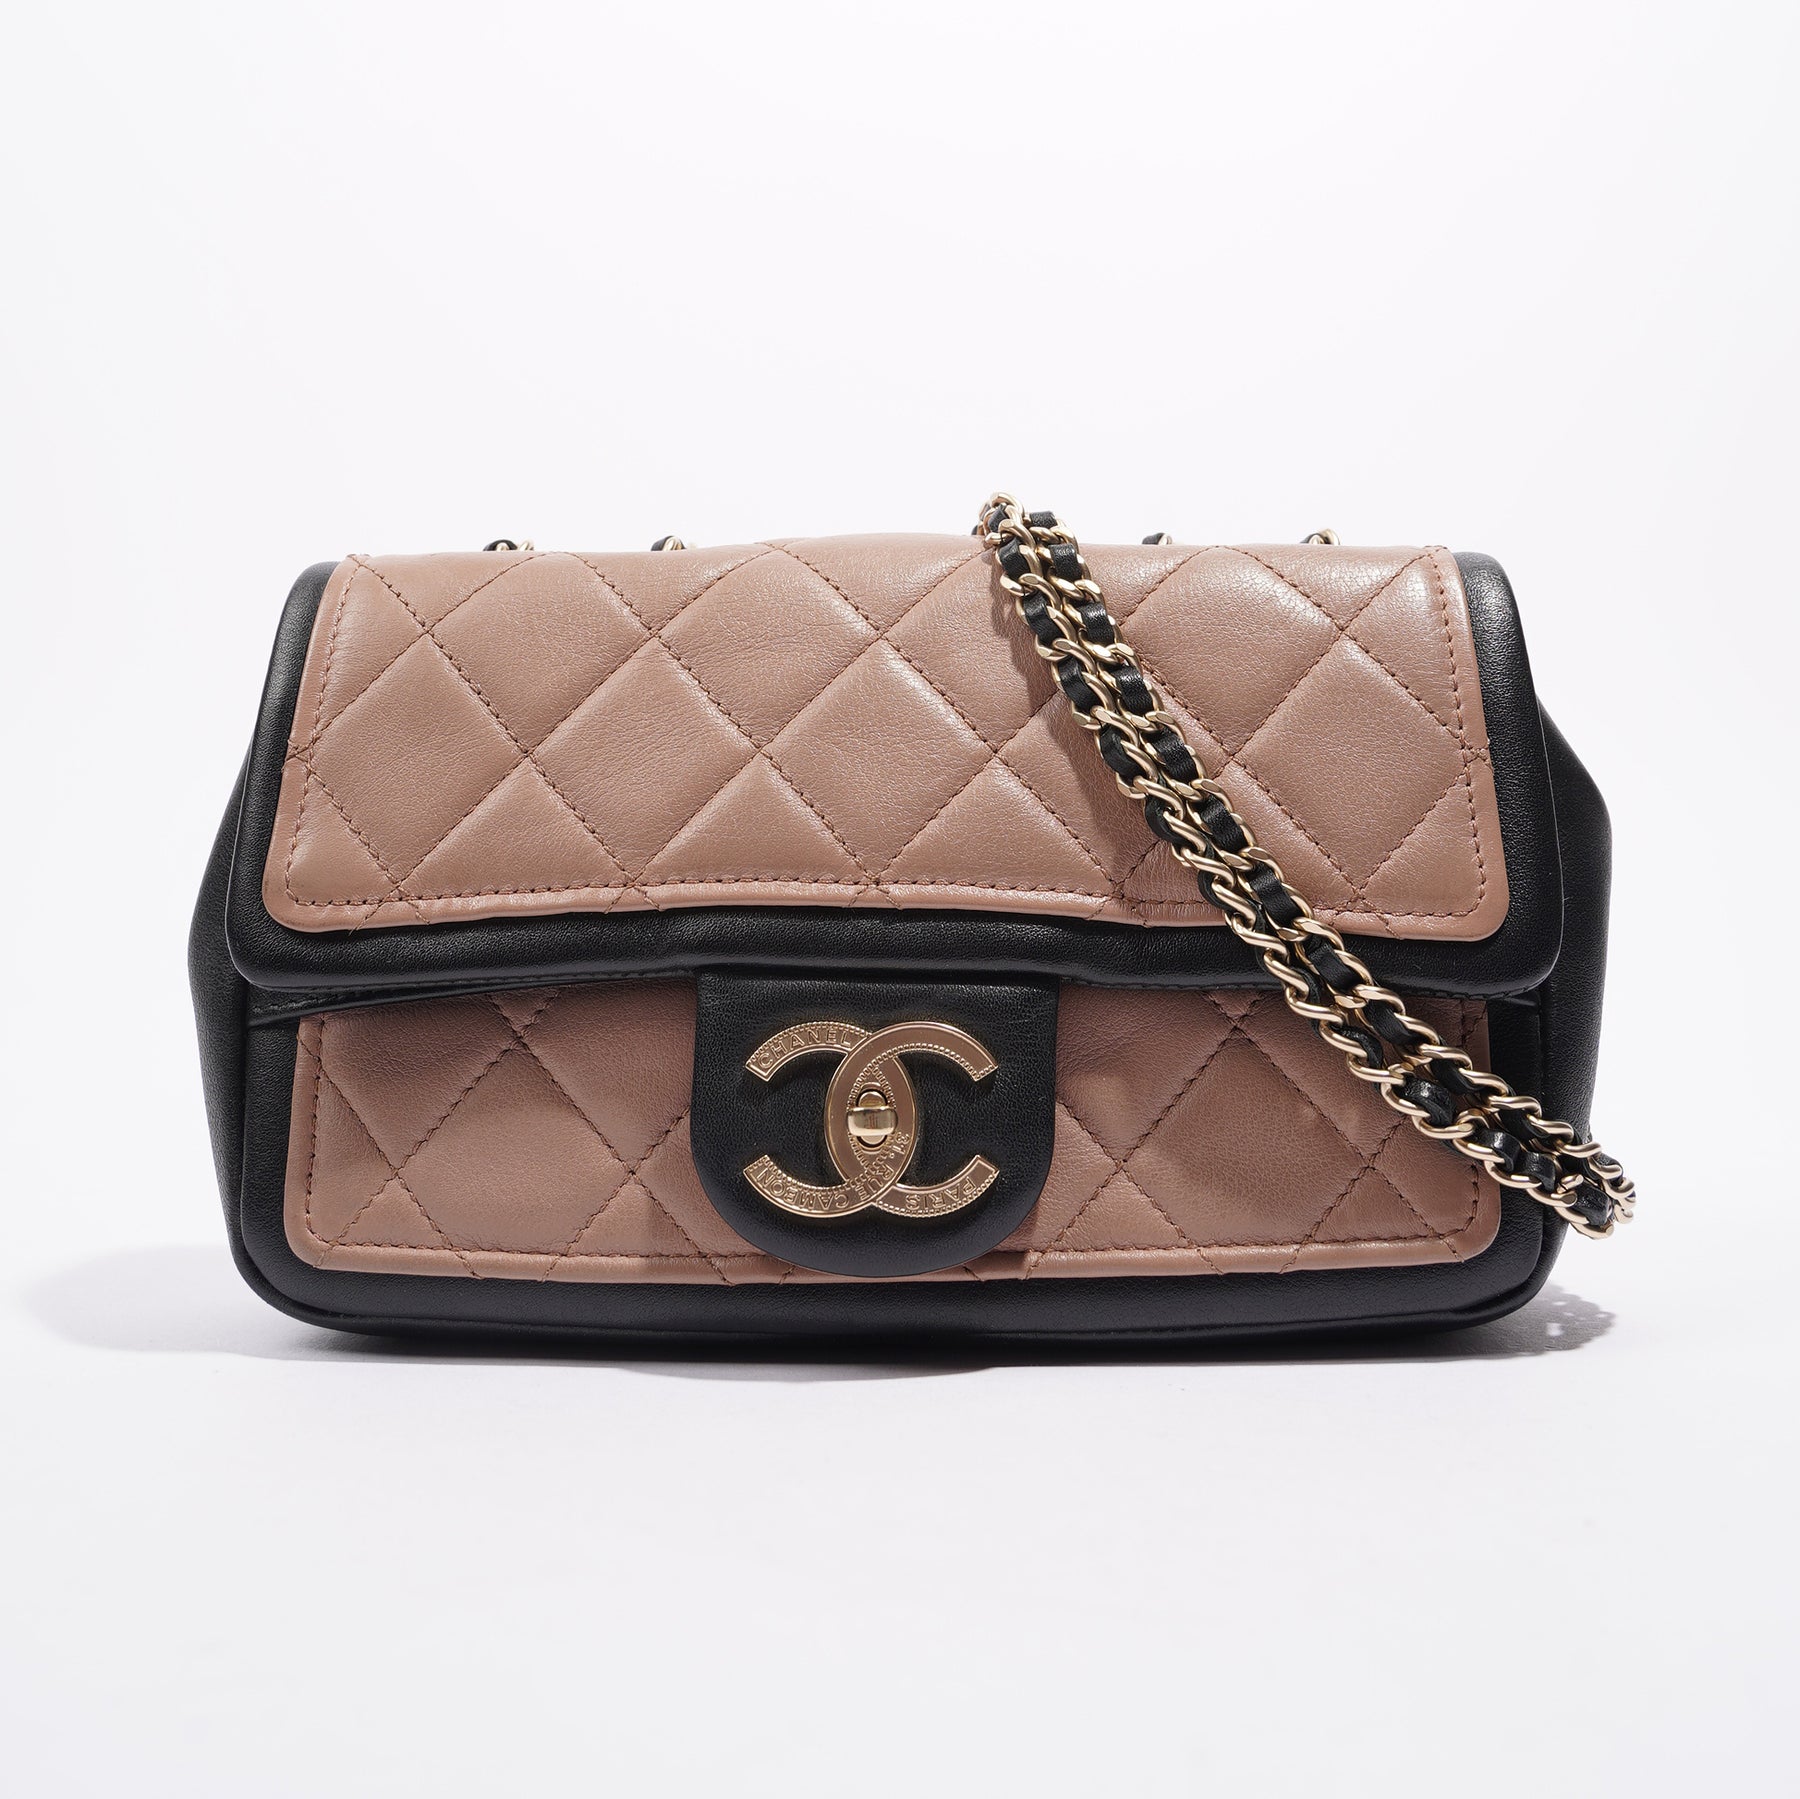 Chanel Womens Heart Bag 22s Purple Micro – Luxe Collective